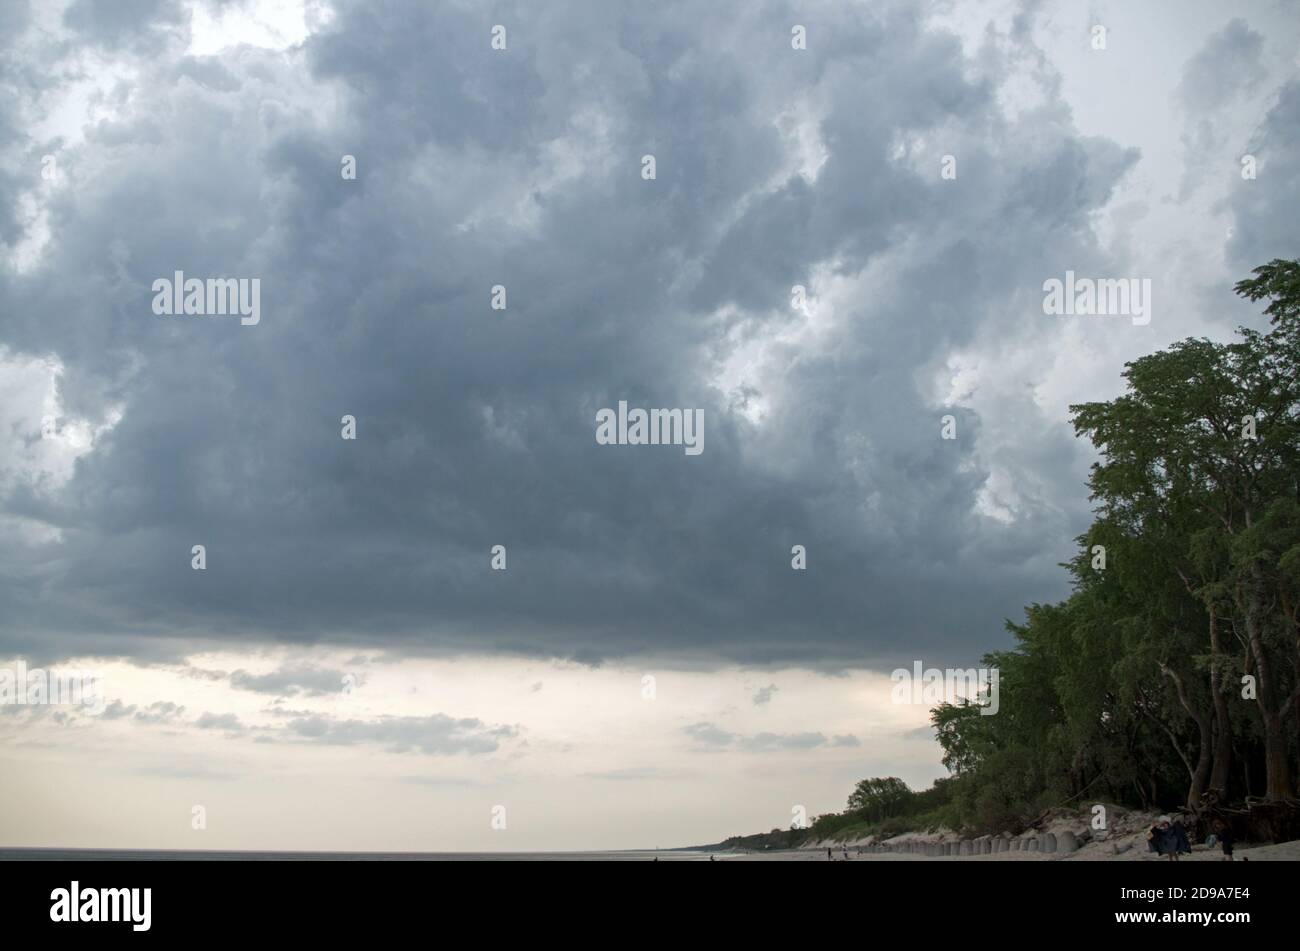 Coast of restless dark blue sea and trees on sandy slope stretching into horizon against background of pre thunderous gsky with dark heavy clouds Stock Photo